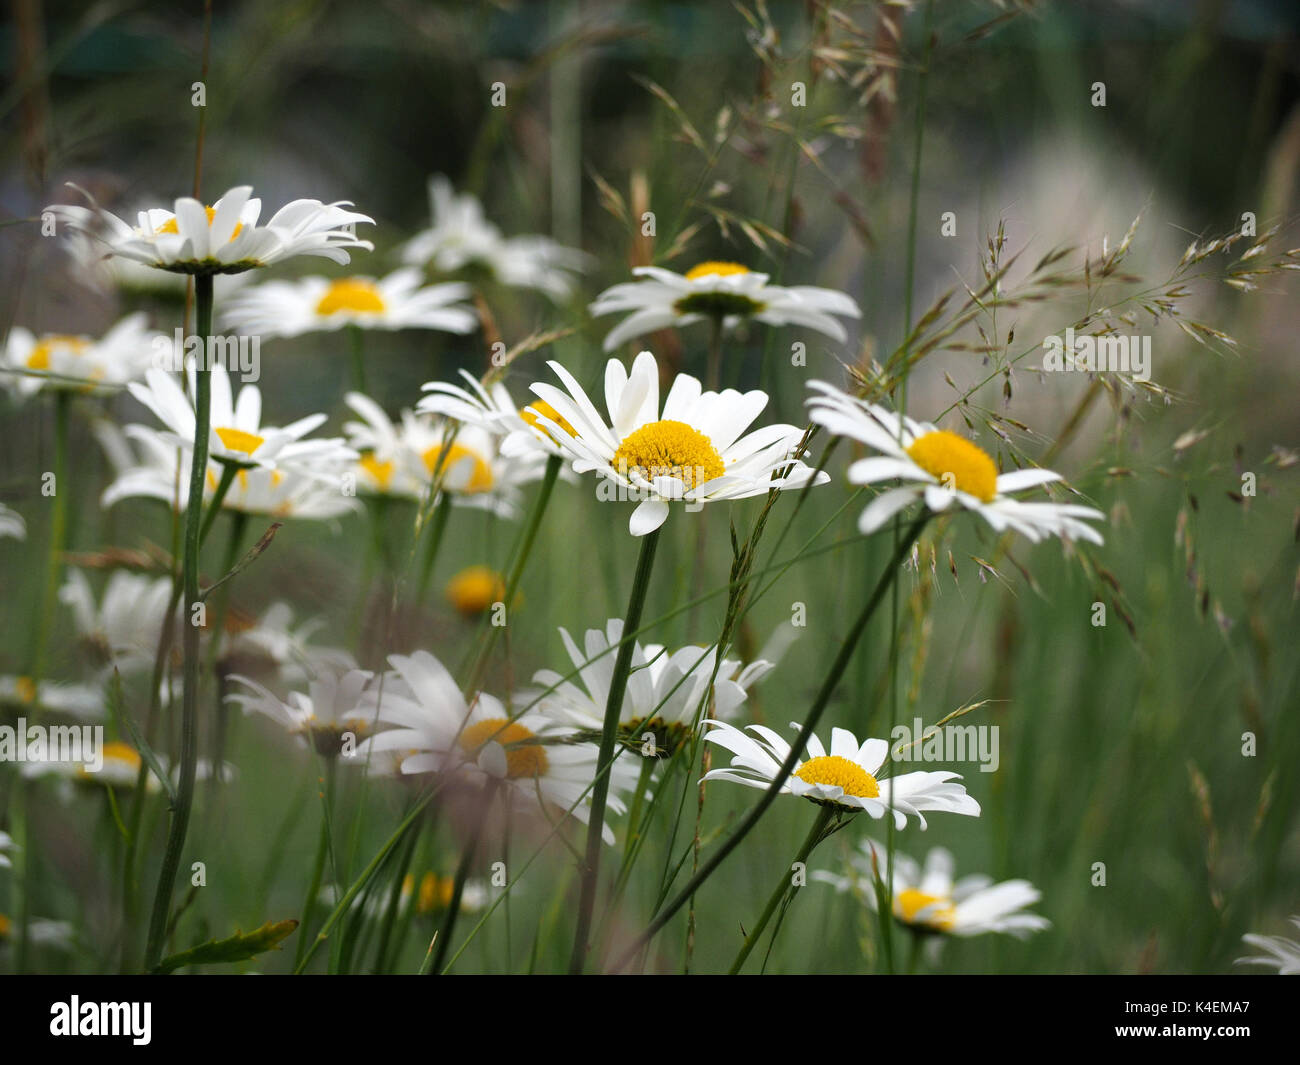 patch of yellow and white daisies on grassy wildflower roadside verge in Cumbria, England, UK Stock Photo